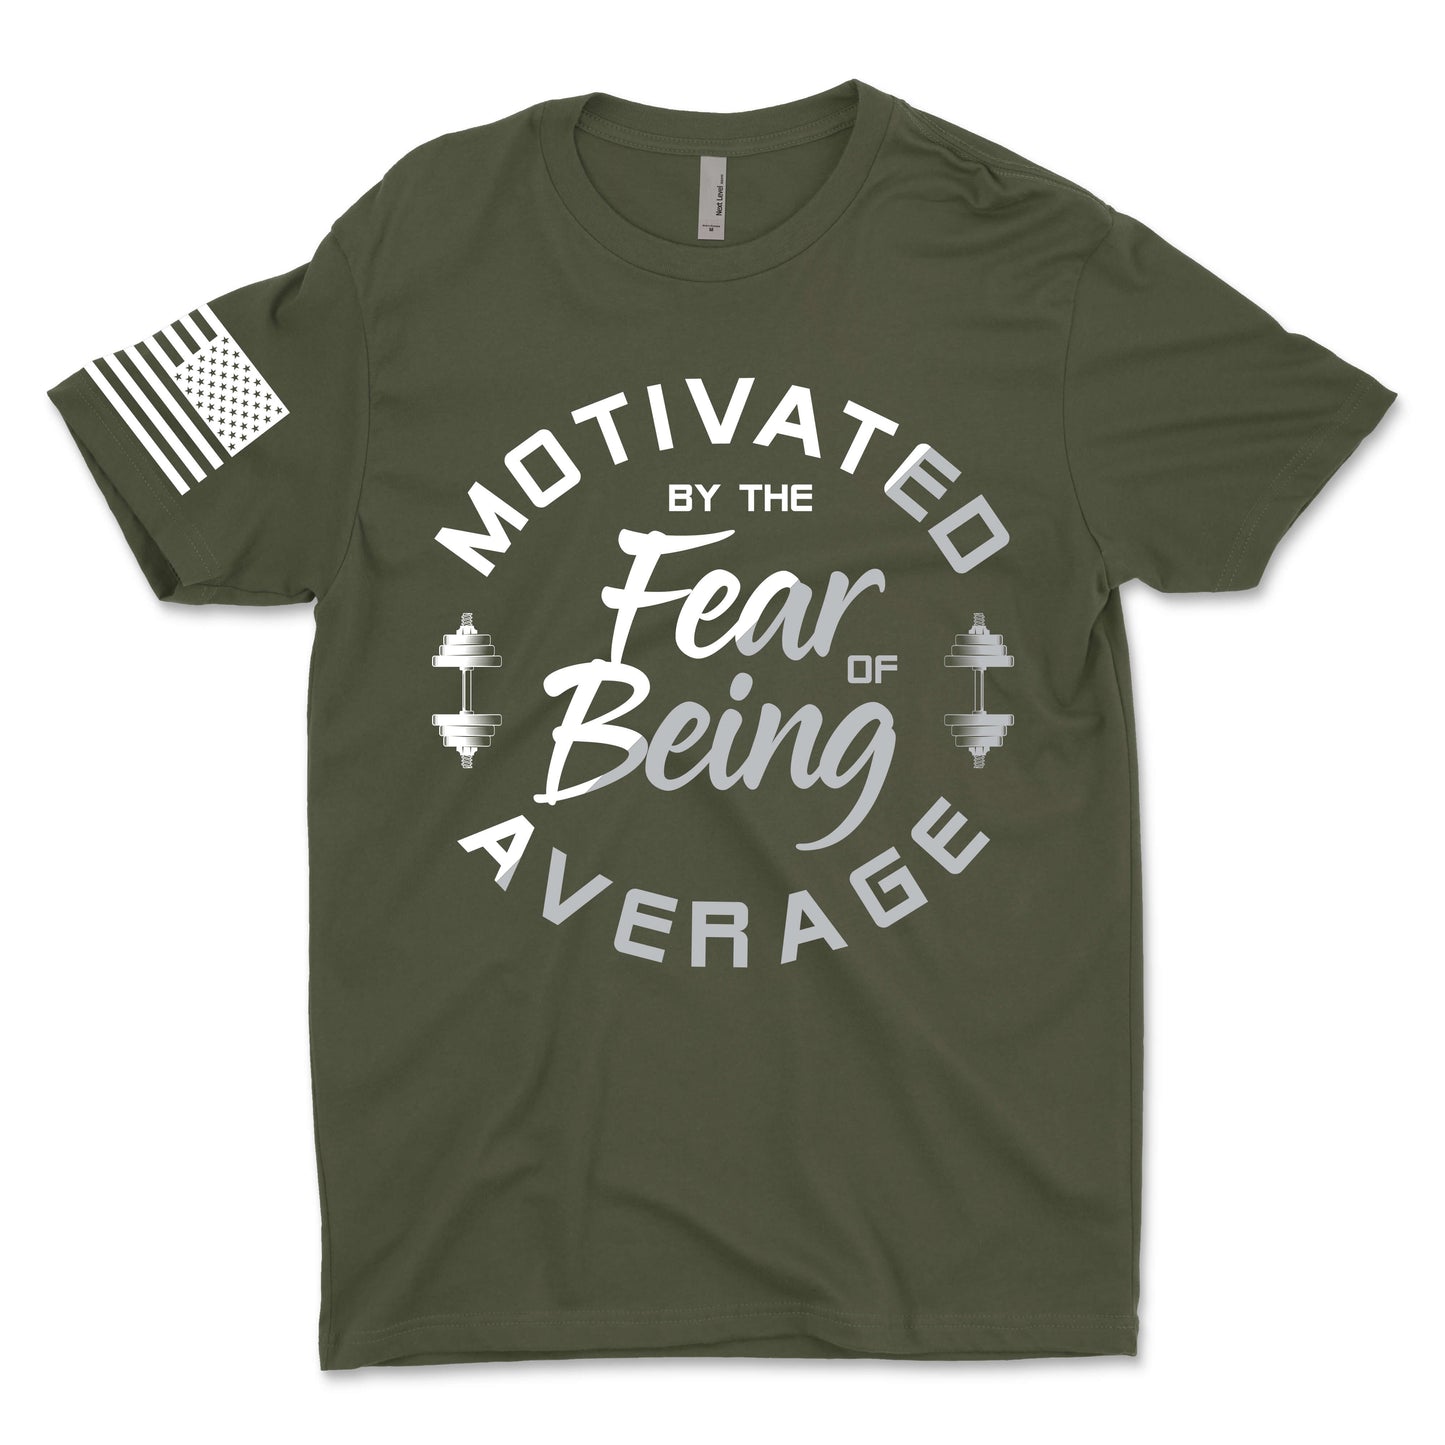 Motivated By The Fear of Being Average Men's T-Shirt